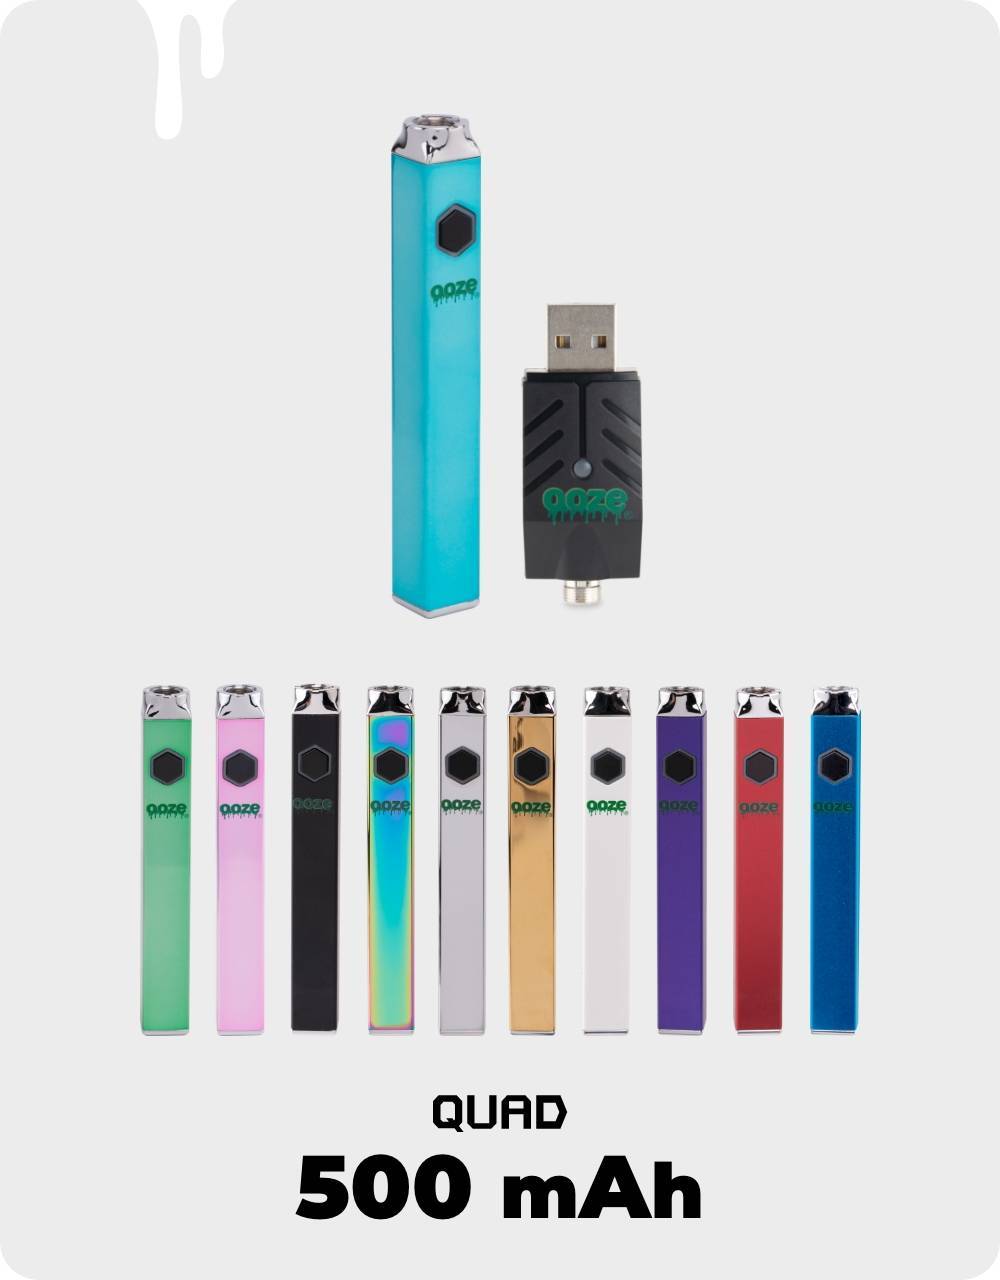 All 11 colors of the Ooze Quad square vape battery are shown. The Arctic Blue pen and charger are on the top, and the bottom says 500 mAh.